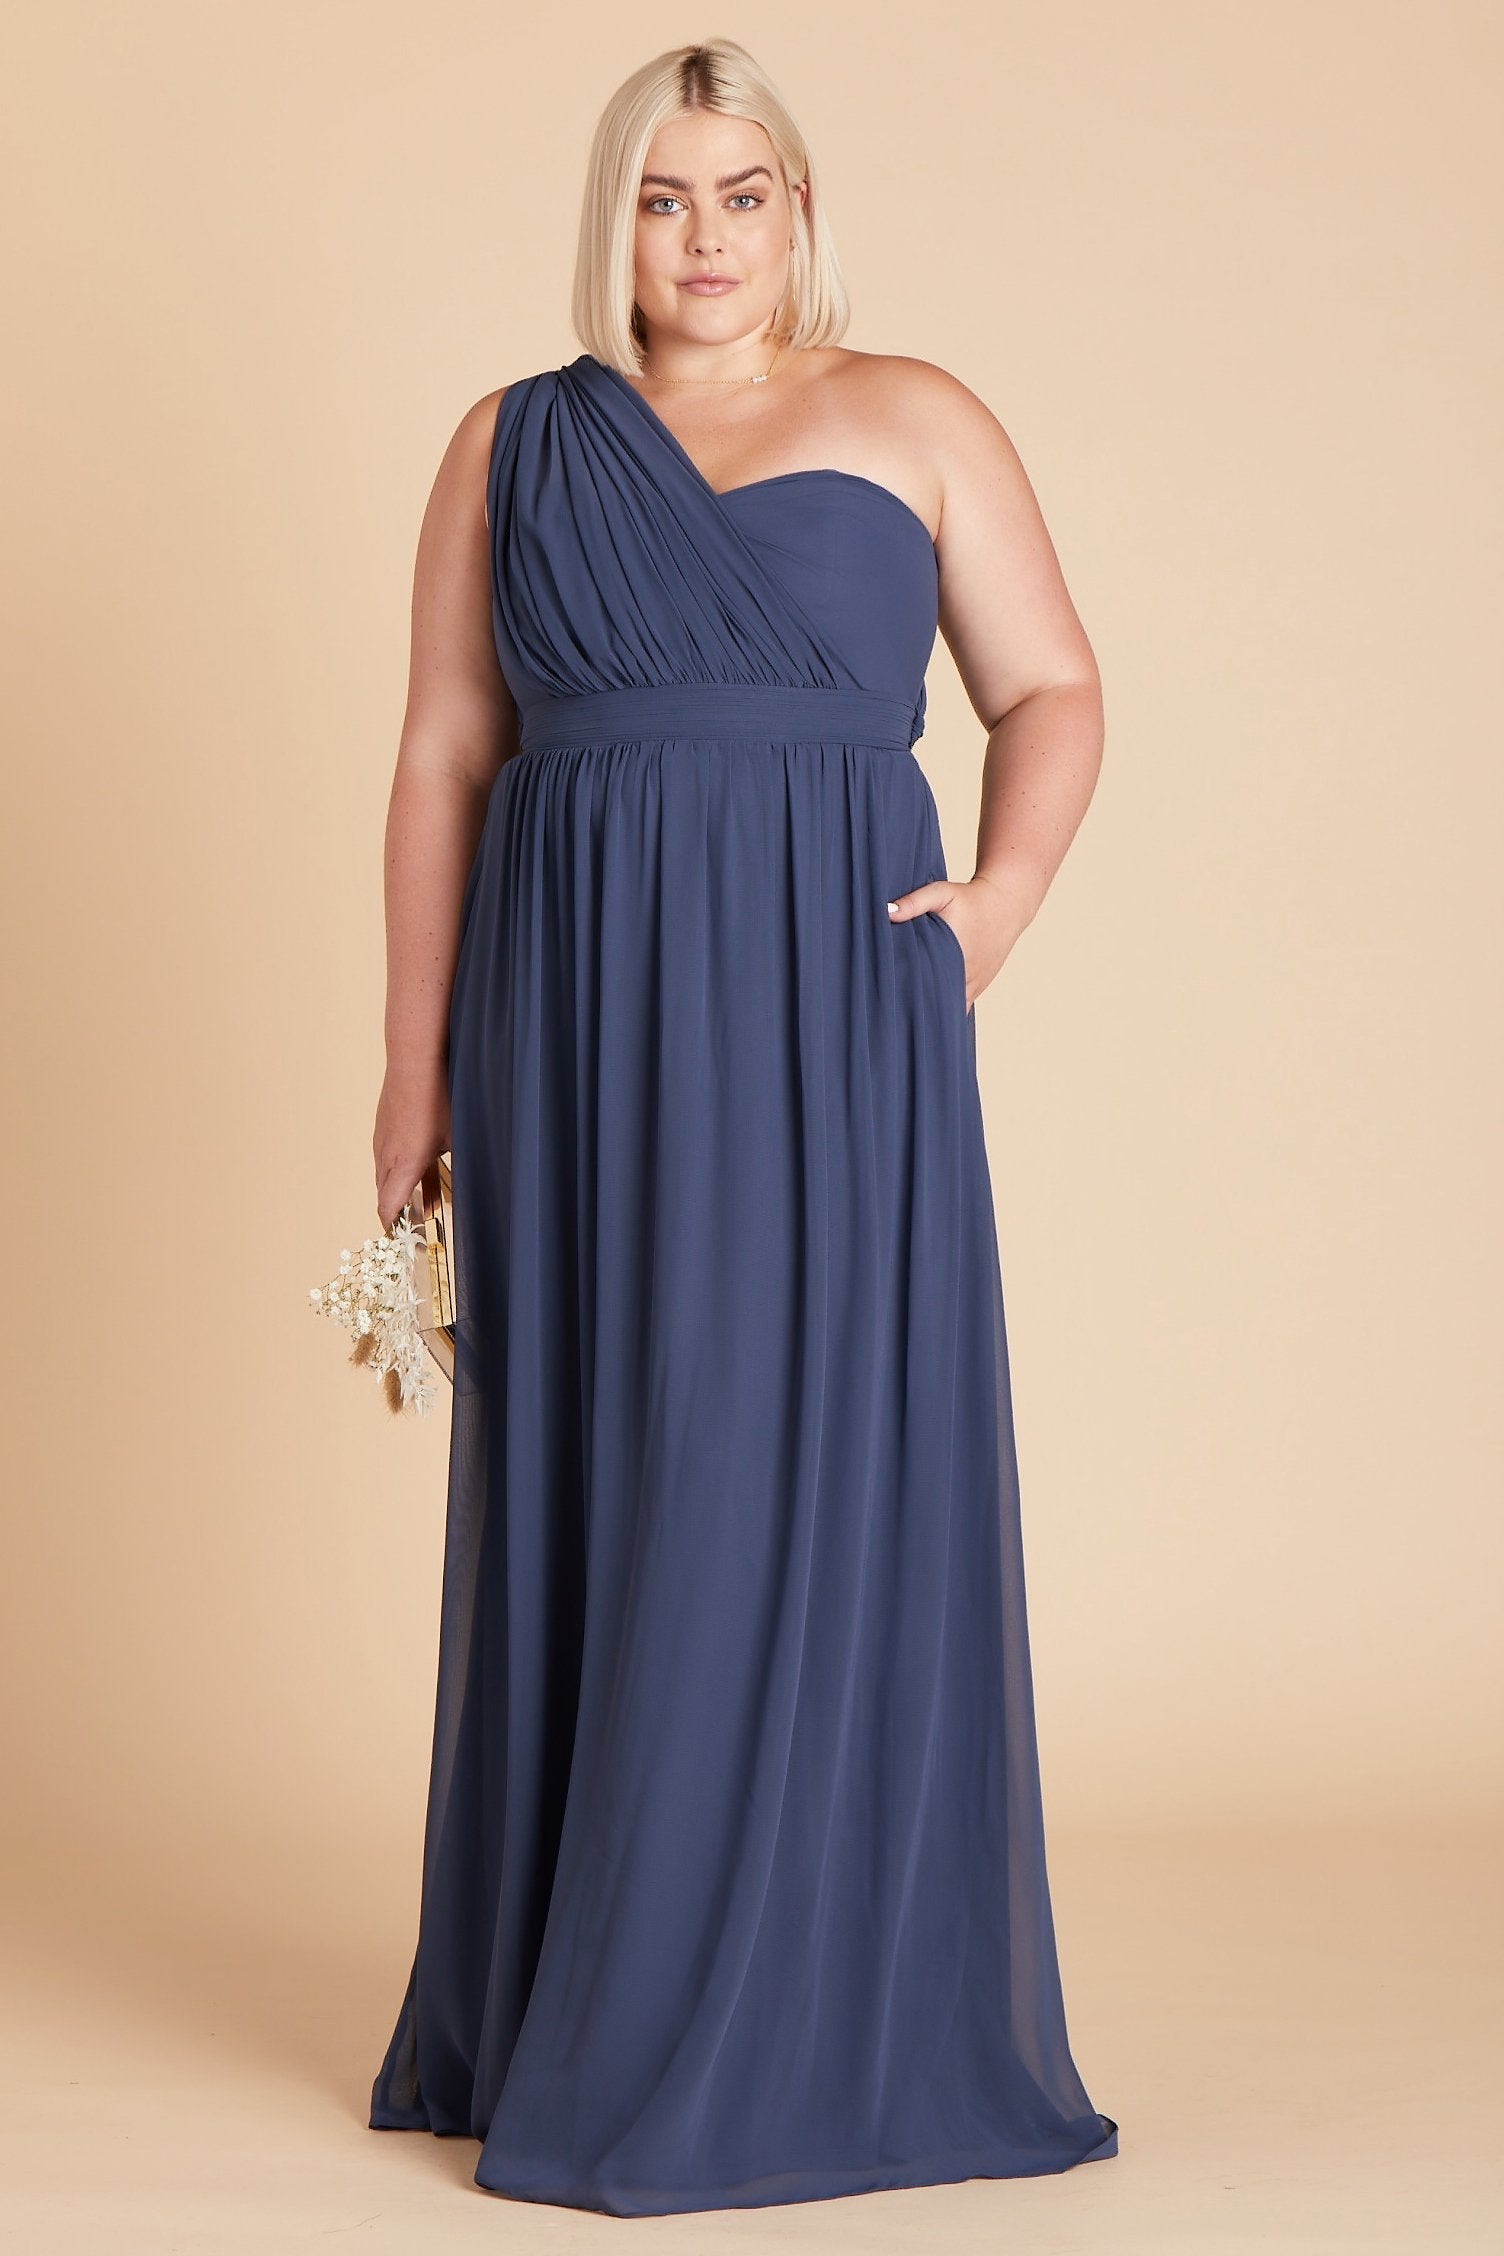 Grace convertible plus size bridesmaid dress in slate blue chiffon by Birdy Grey, front view with hand in pocket